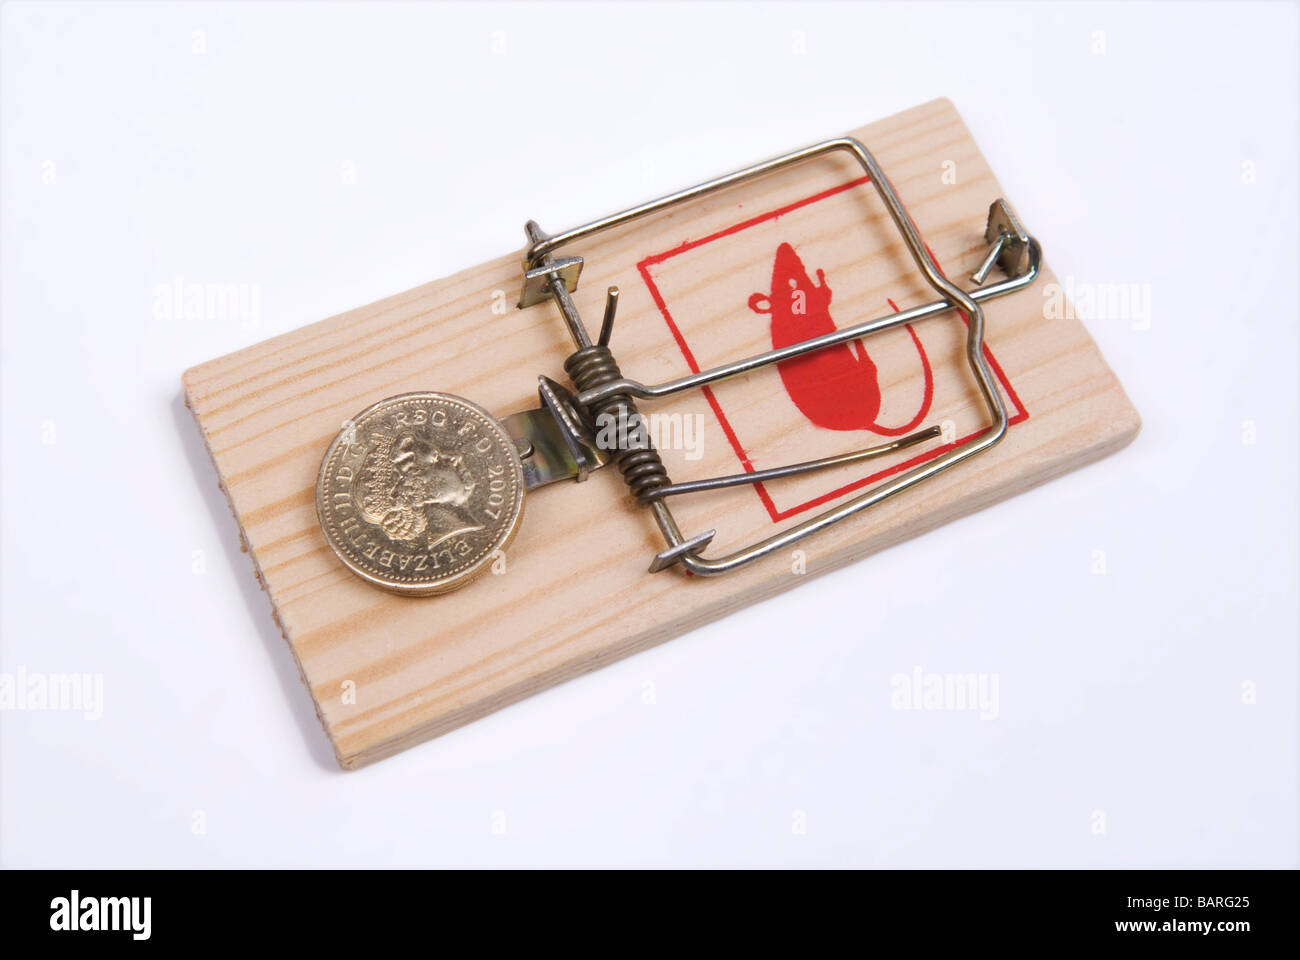 One pound British coin on a mouse trap against a white background Stock Photo